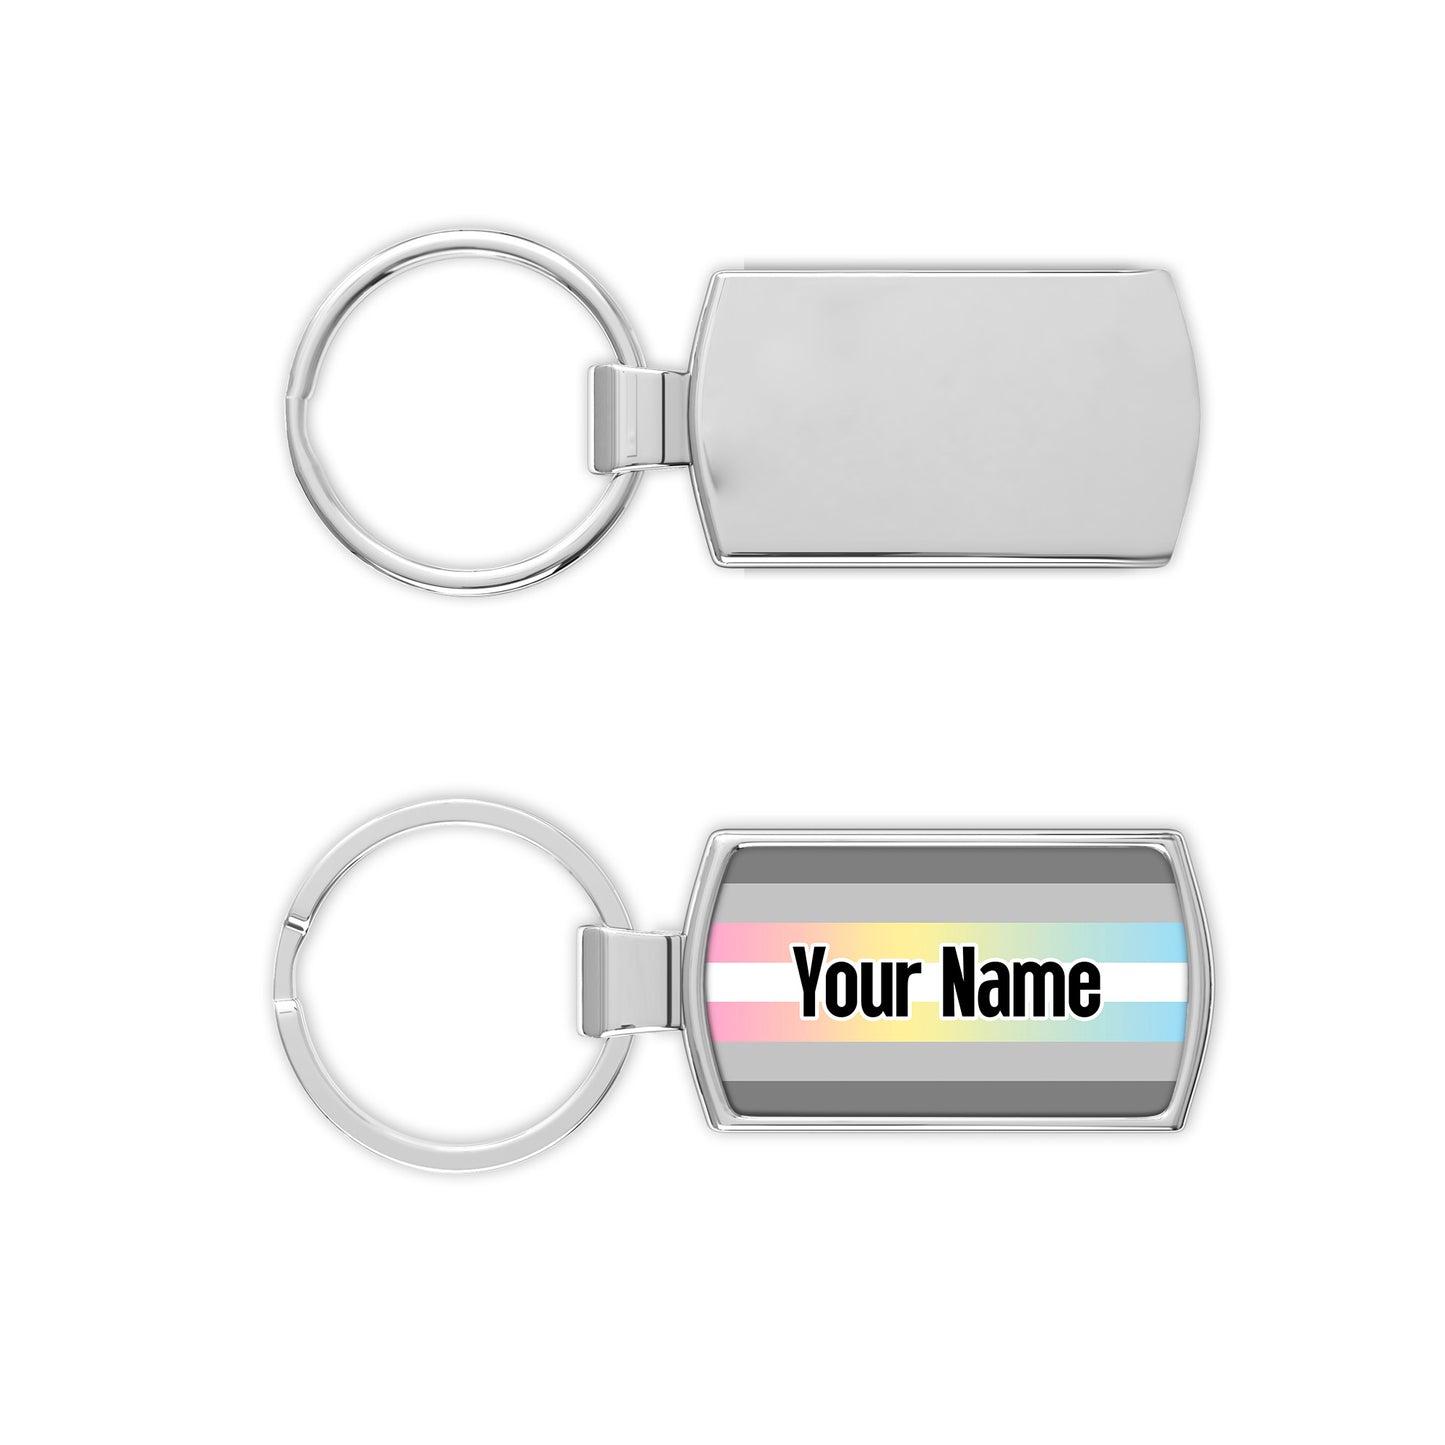 Demiflux pride flag metal keyring that comes personalised with your name